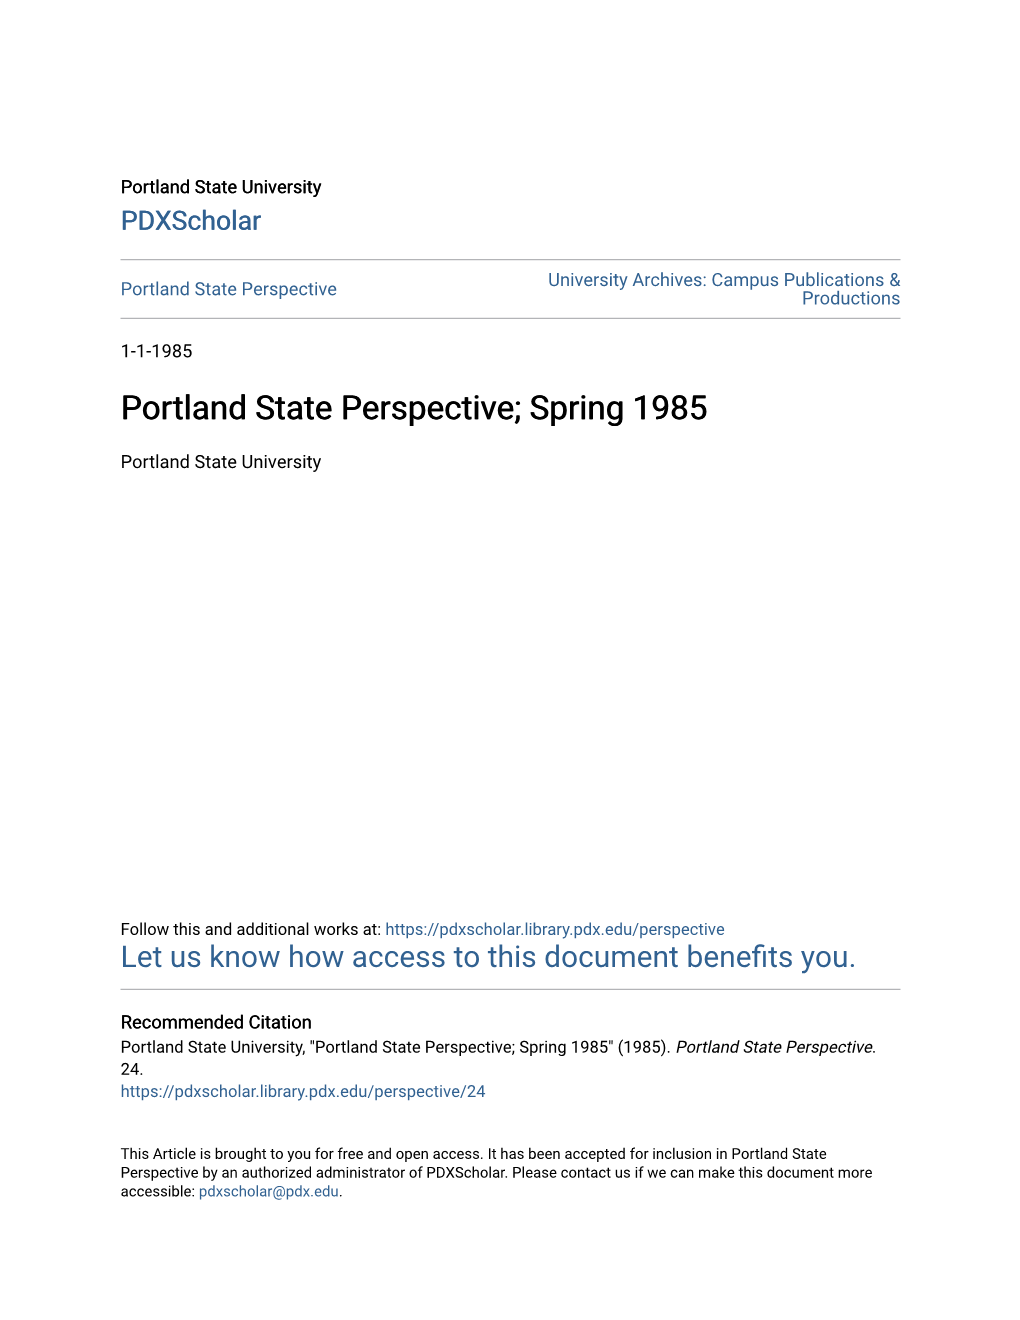 Portland State Perspective Productions